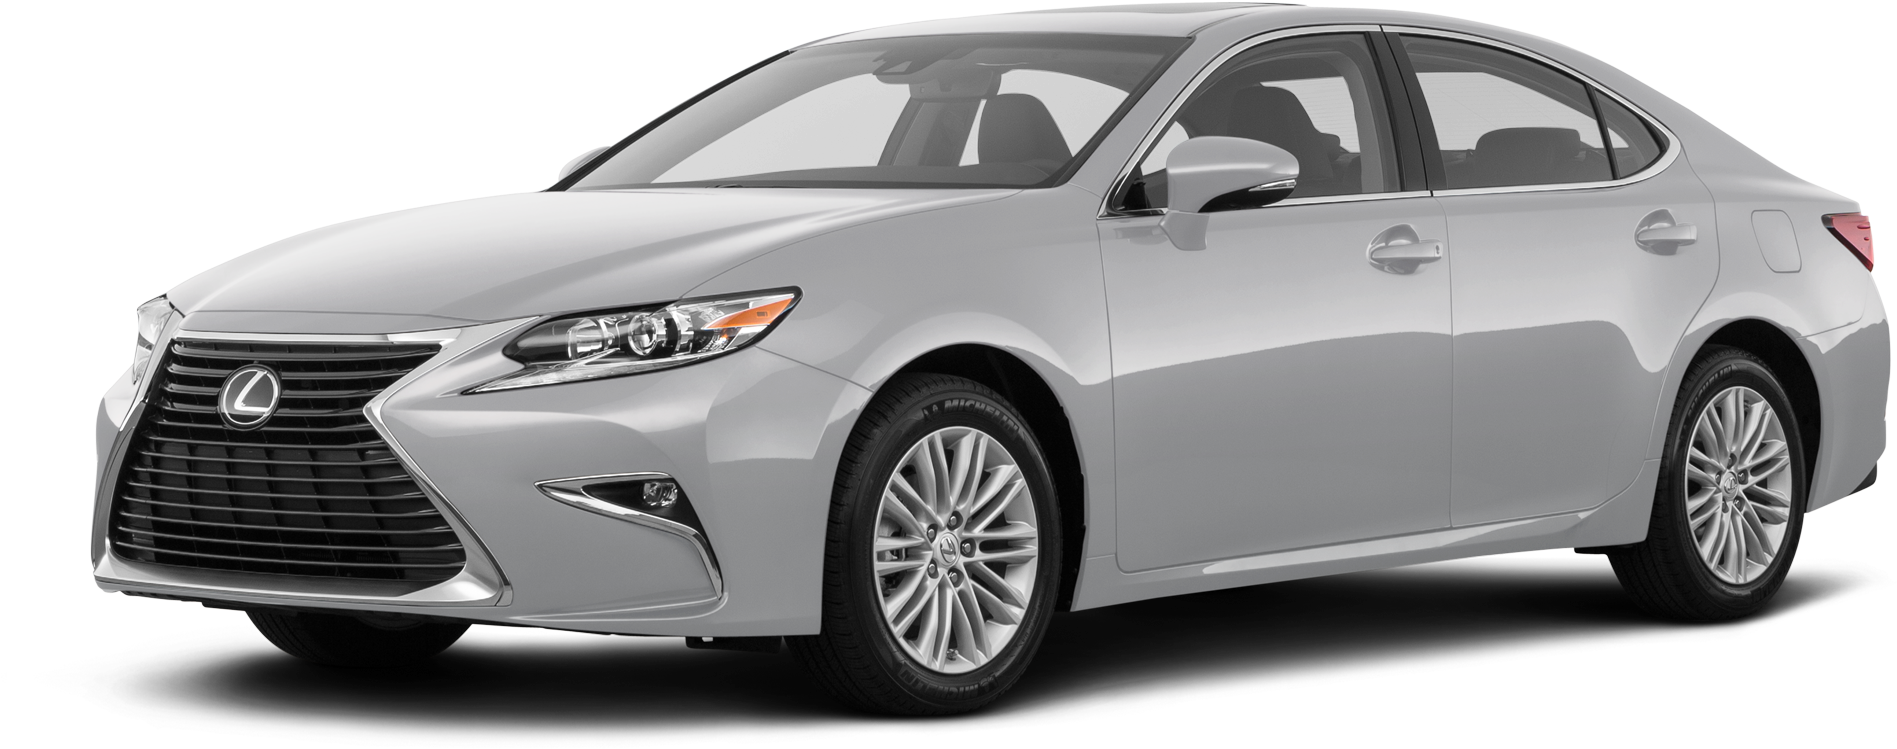 Download 2018 Lexus Es Png Image With No Background Pngkey Com